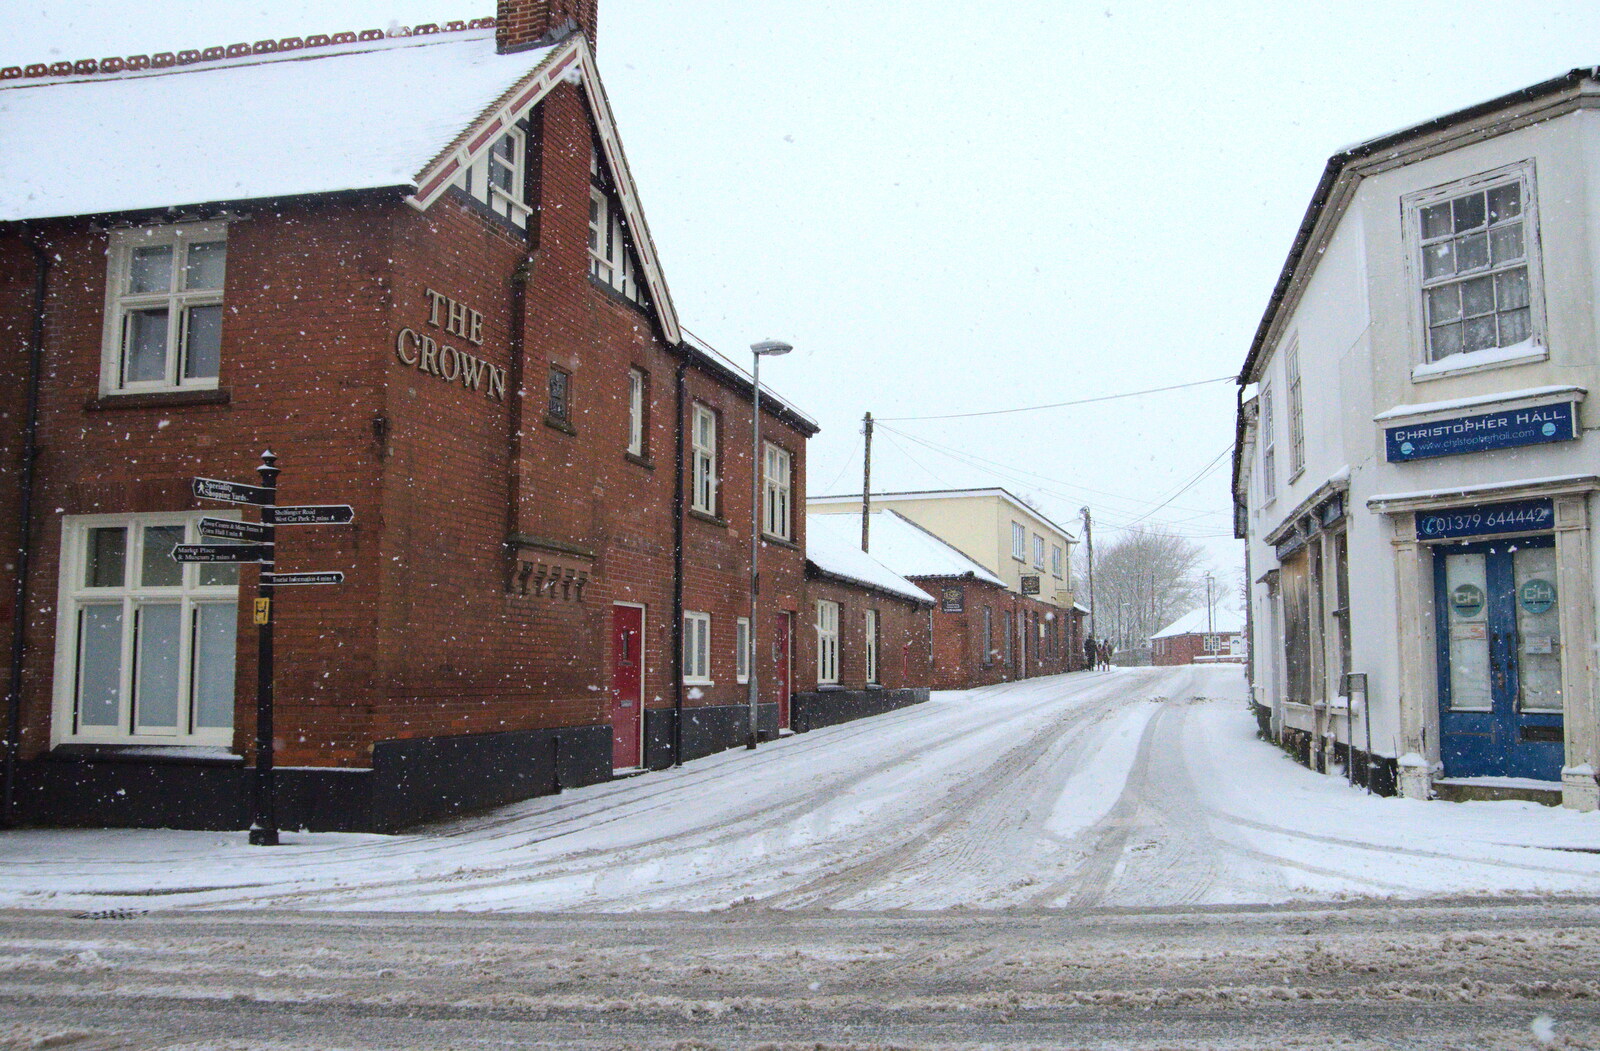 The old Crown pub and derelict Christopher Hall offices from A Snowy Morning, Diss, Norfolk - 16th January 2021